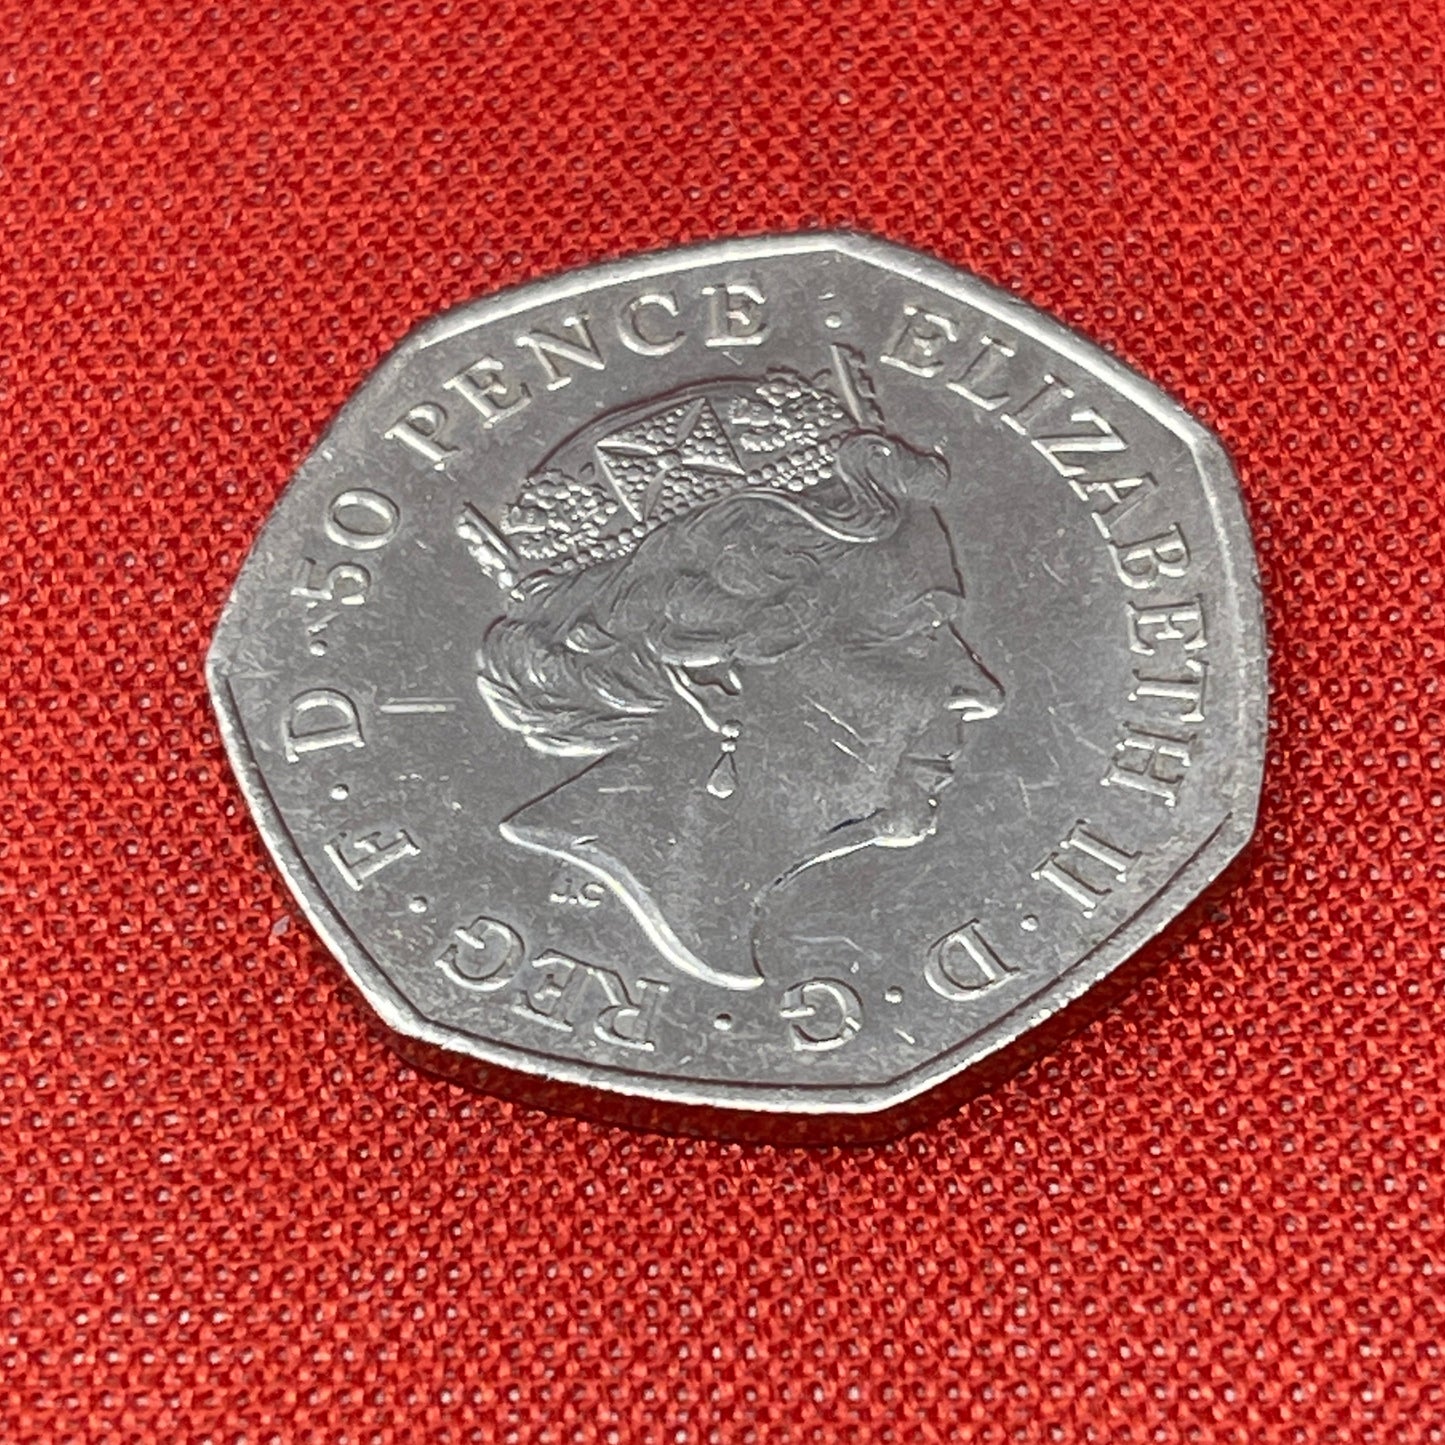 2016 Battle of Hastings 50p Fifty pence Coin Circulated 